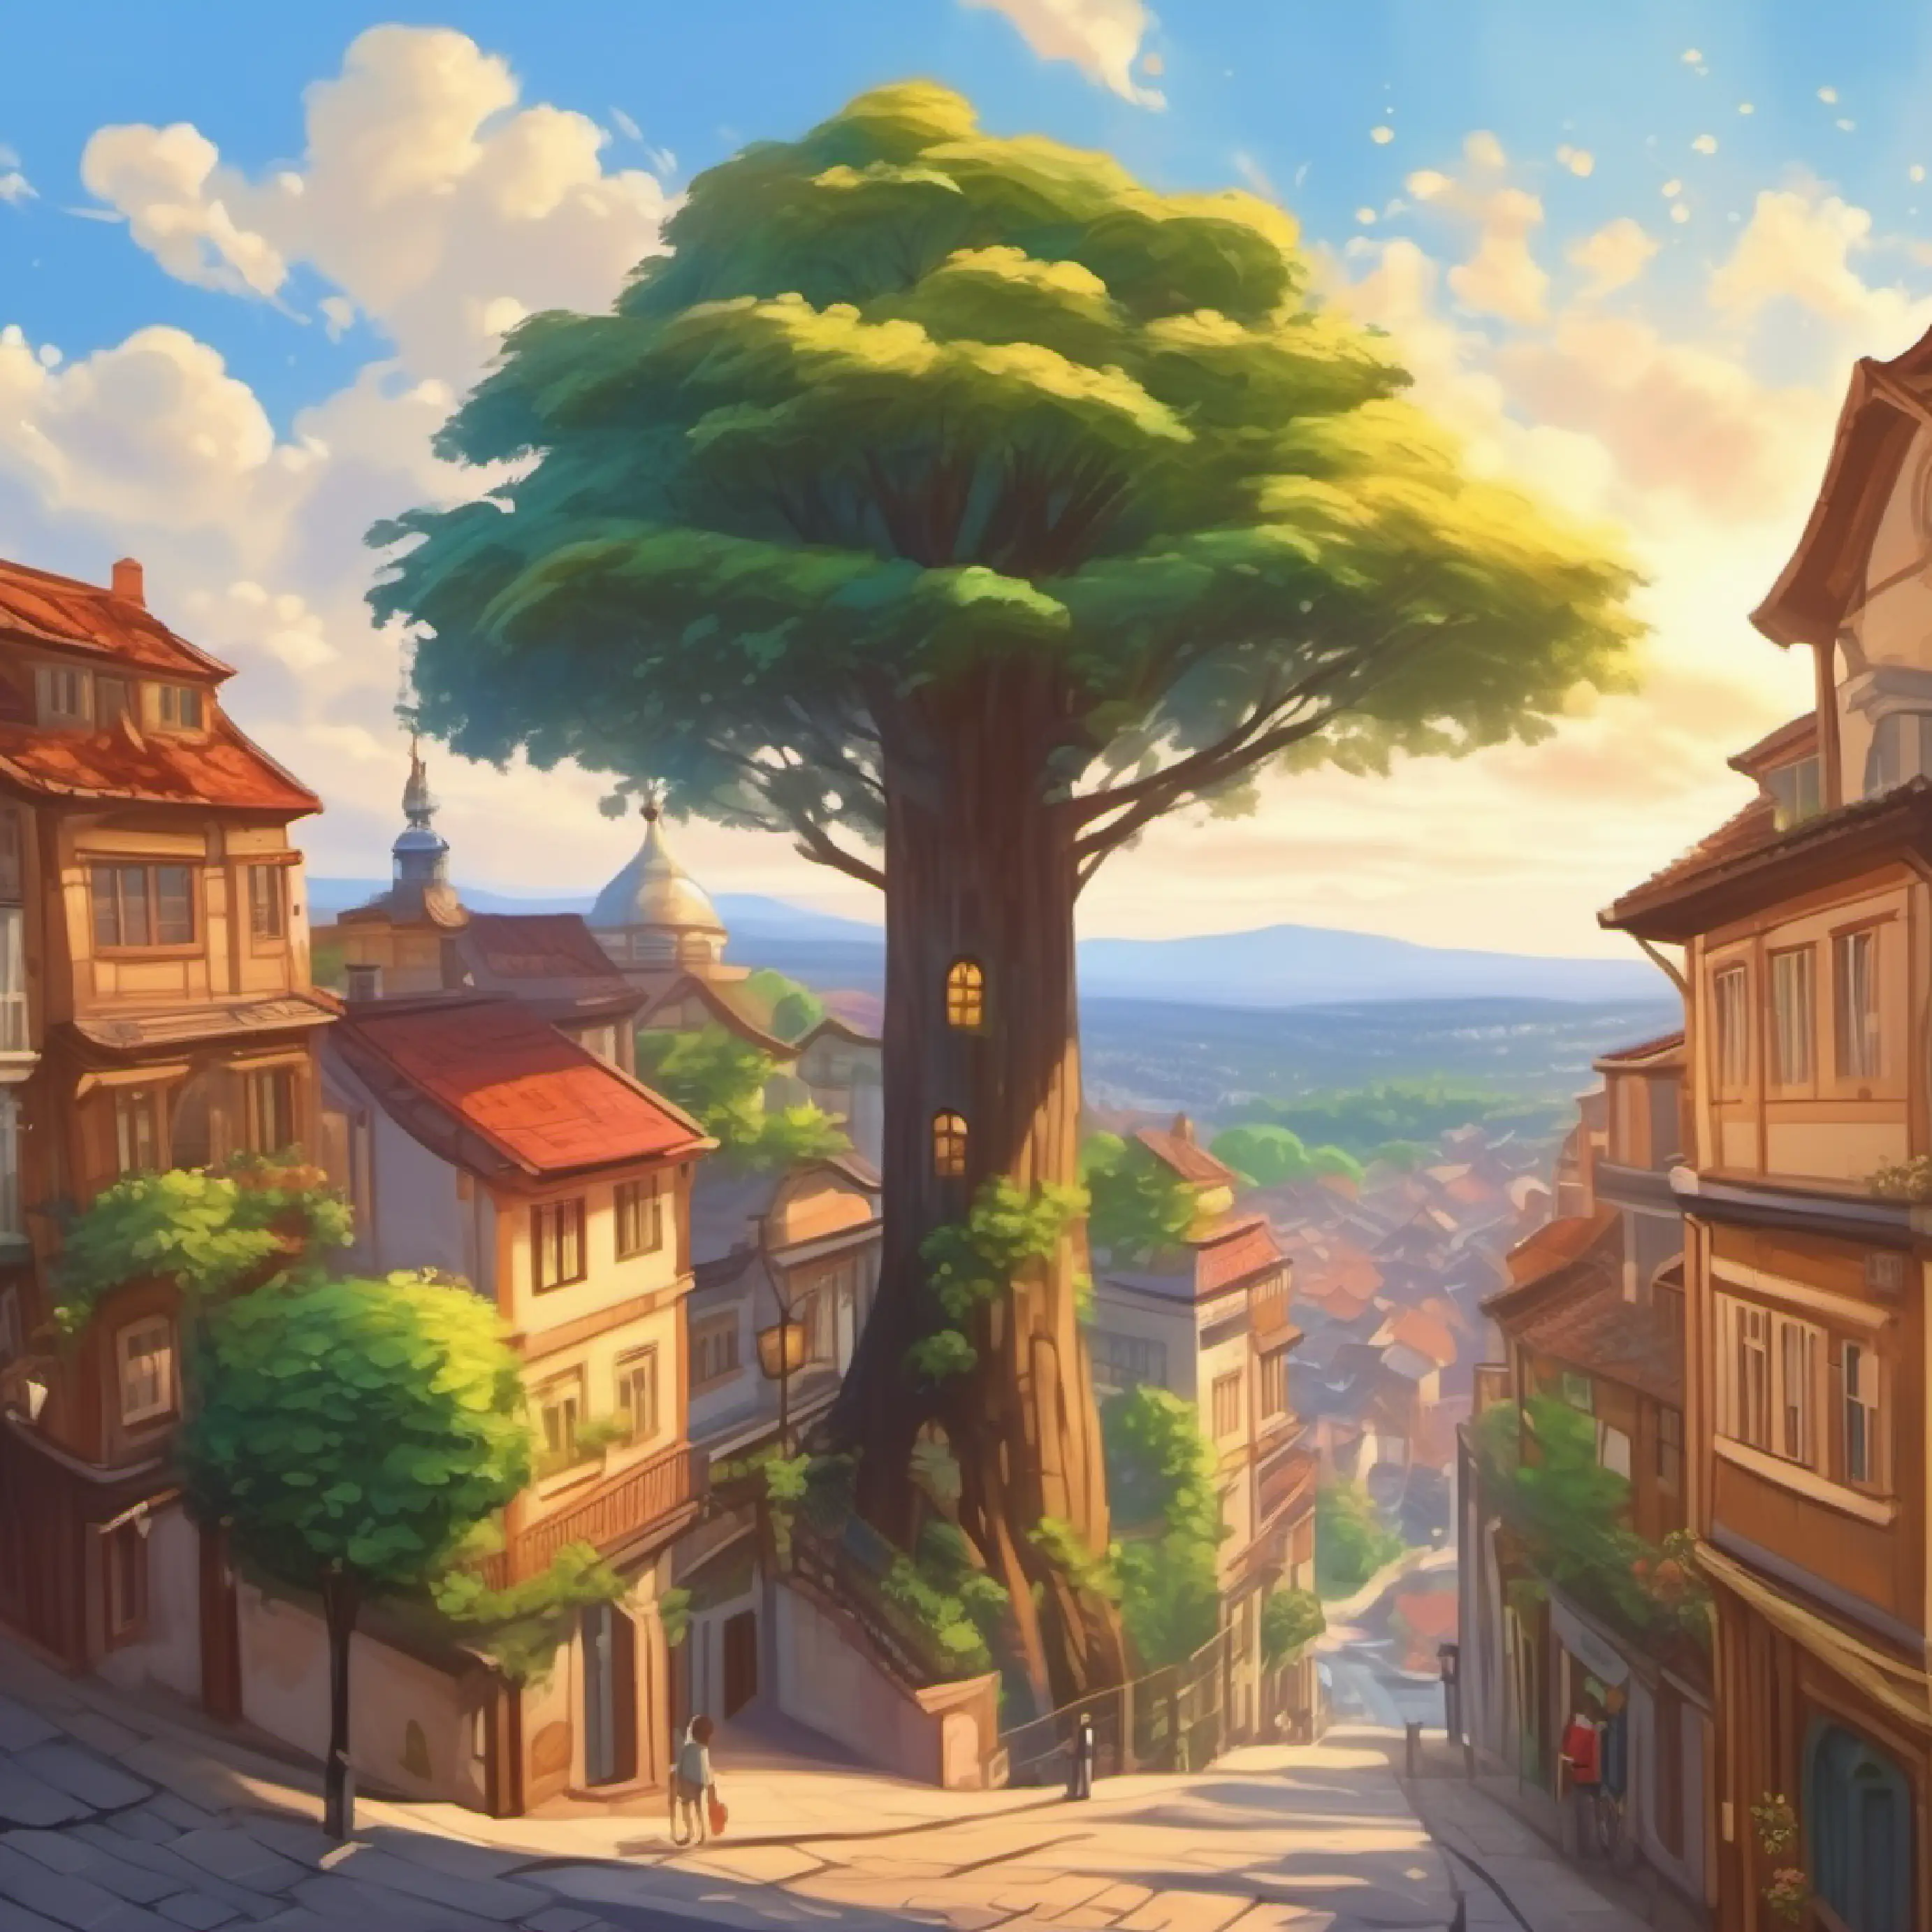 Climbing the tallest tree, majestic view of town